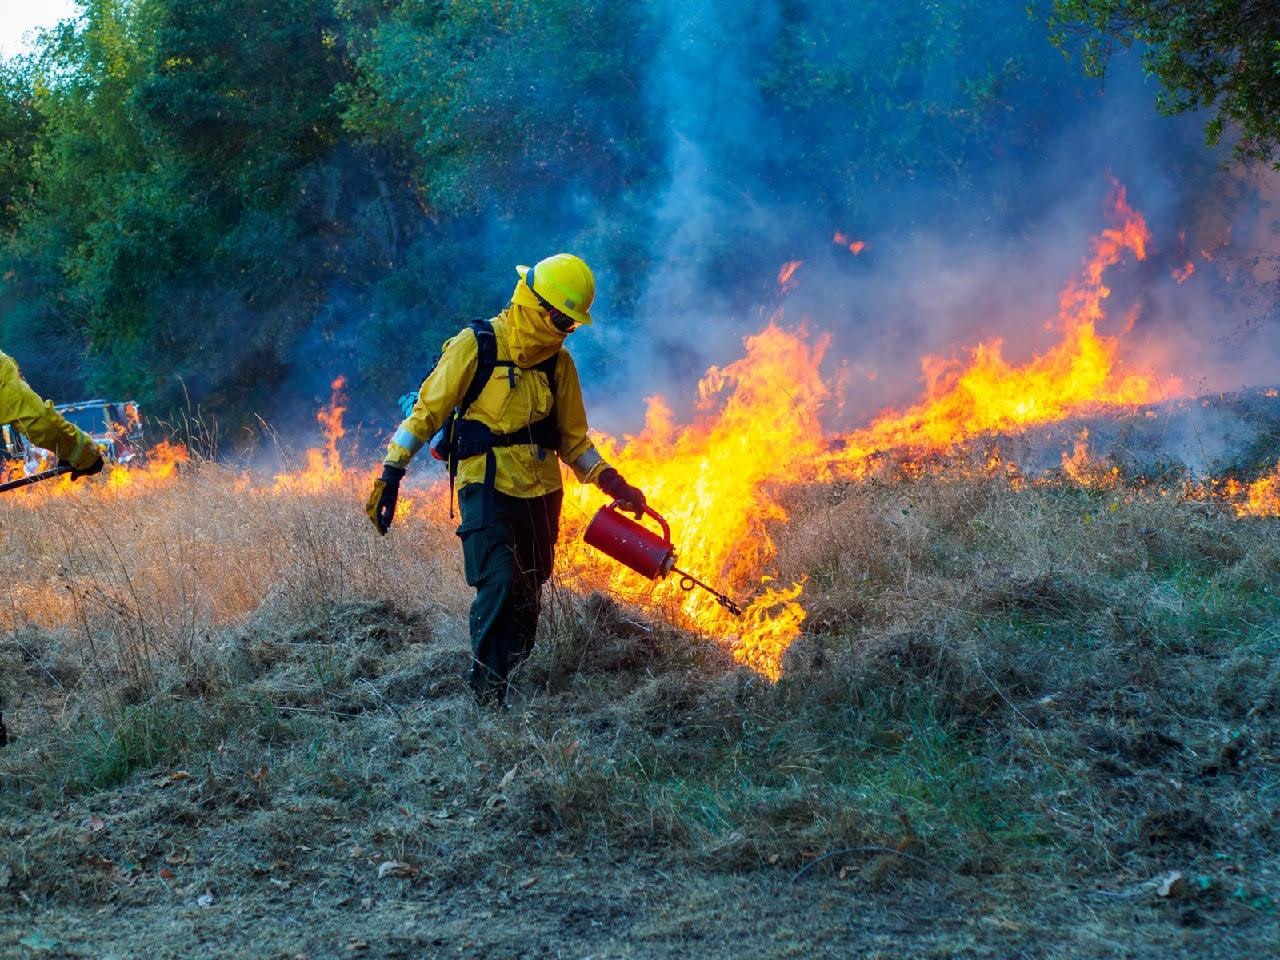  An image from a prescribed broadcast burn in Jack London State Historic Park in 2022.